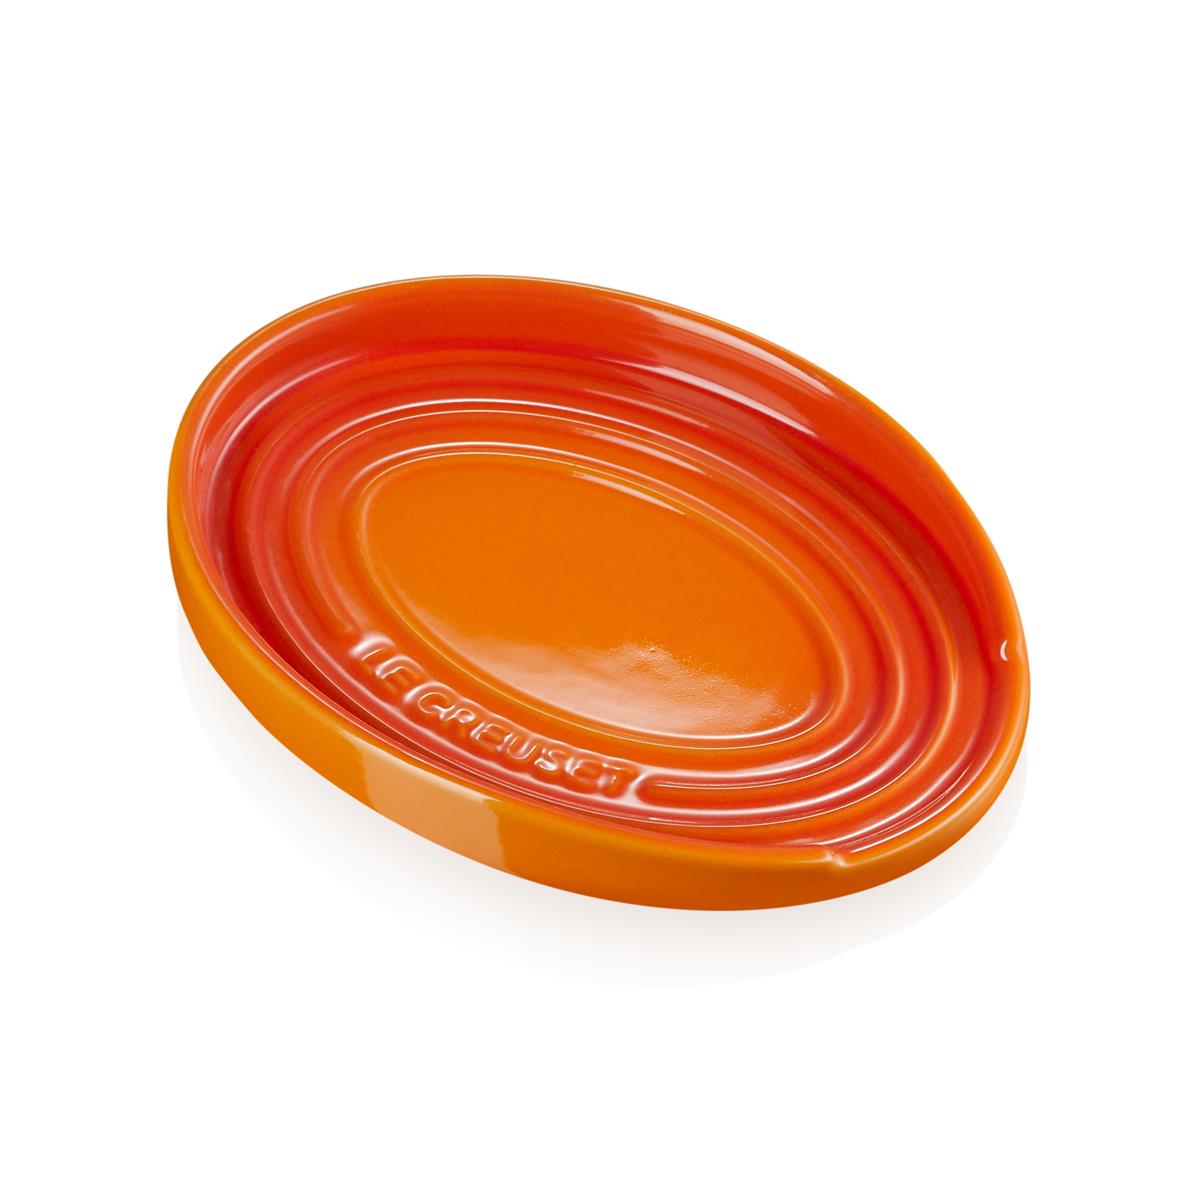 Le Creuset Stoneware Oval Spoon Rest Questions & Answers